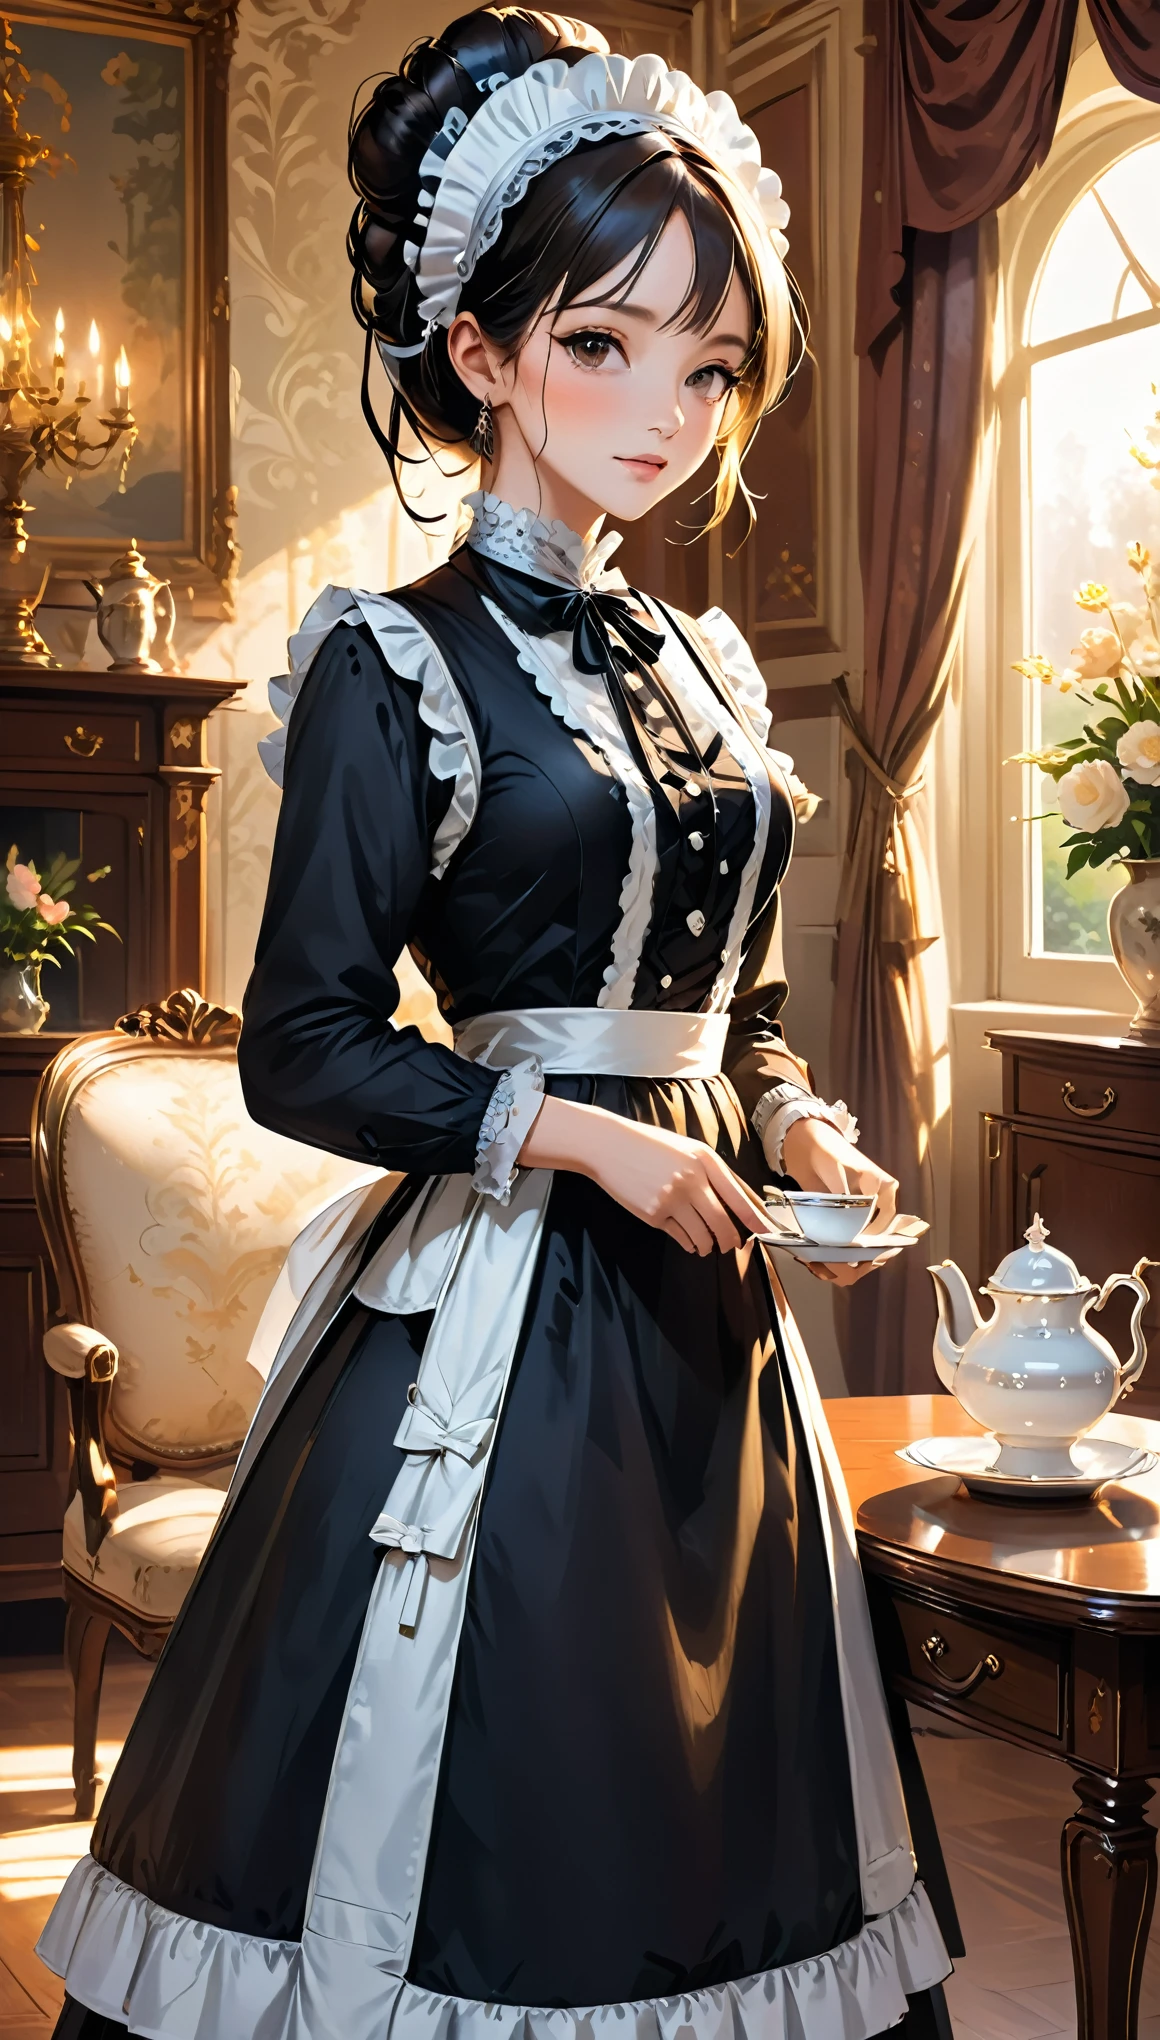 Create an image of a classical maid holding a tea set in a luxurious Victorian living room. The maid should be wearing a traditional black and white maid outfit with a frilly apron and a simple headband. She has a calm and graceful expression. The living room is opulently decorated with rich furnishings. There is a large window in the background through which sunlight is streaming in, casting a warm glow over the room. The room features ornate wallpaper, heavy curtains, a grand chandelier, and antique furniture including a polished wooden table and upholstered chairs. The overall atmosphere is elegant and refined.